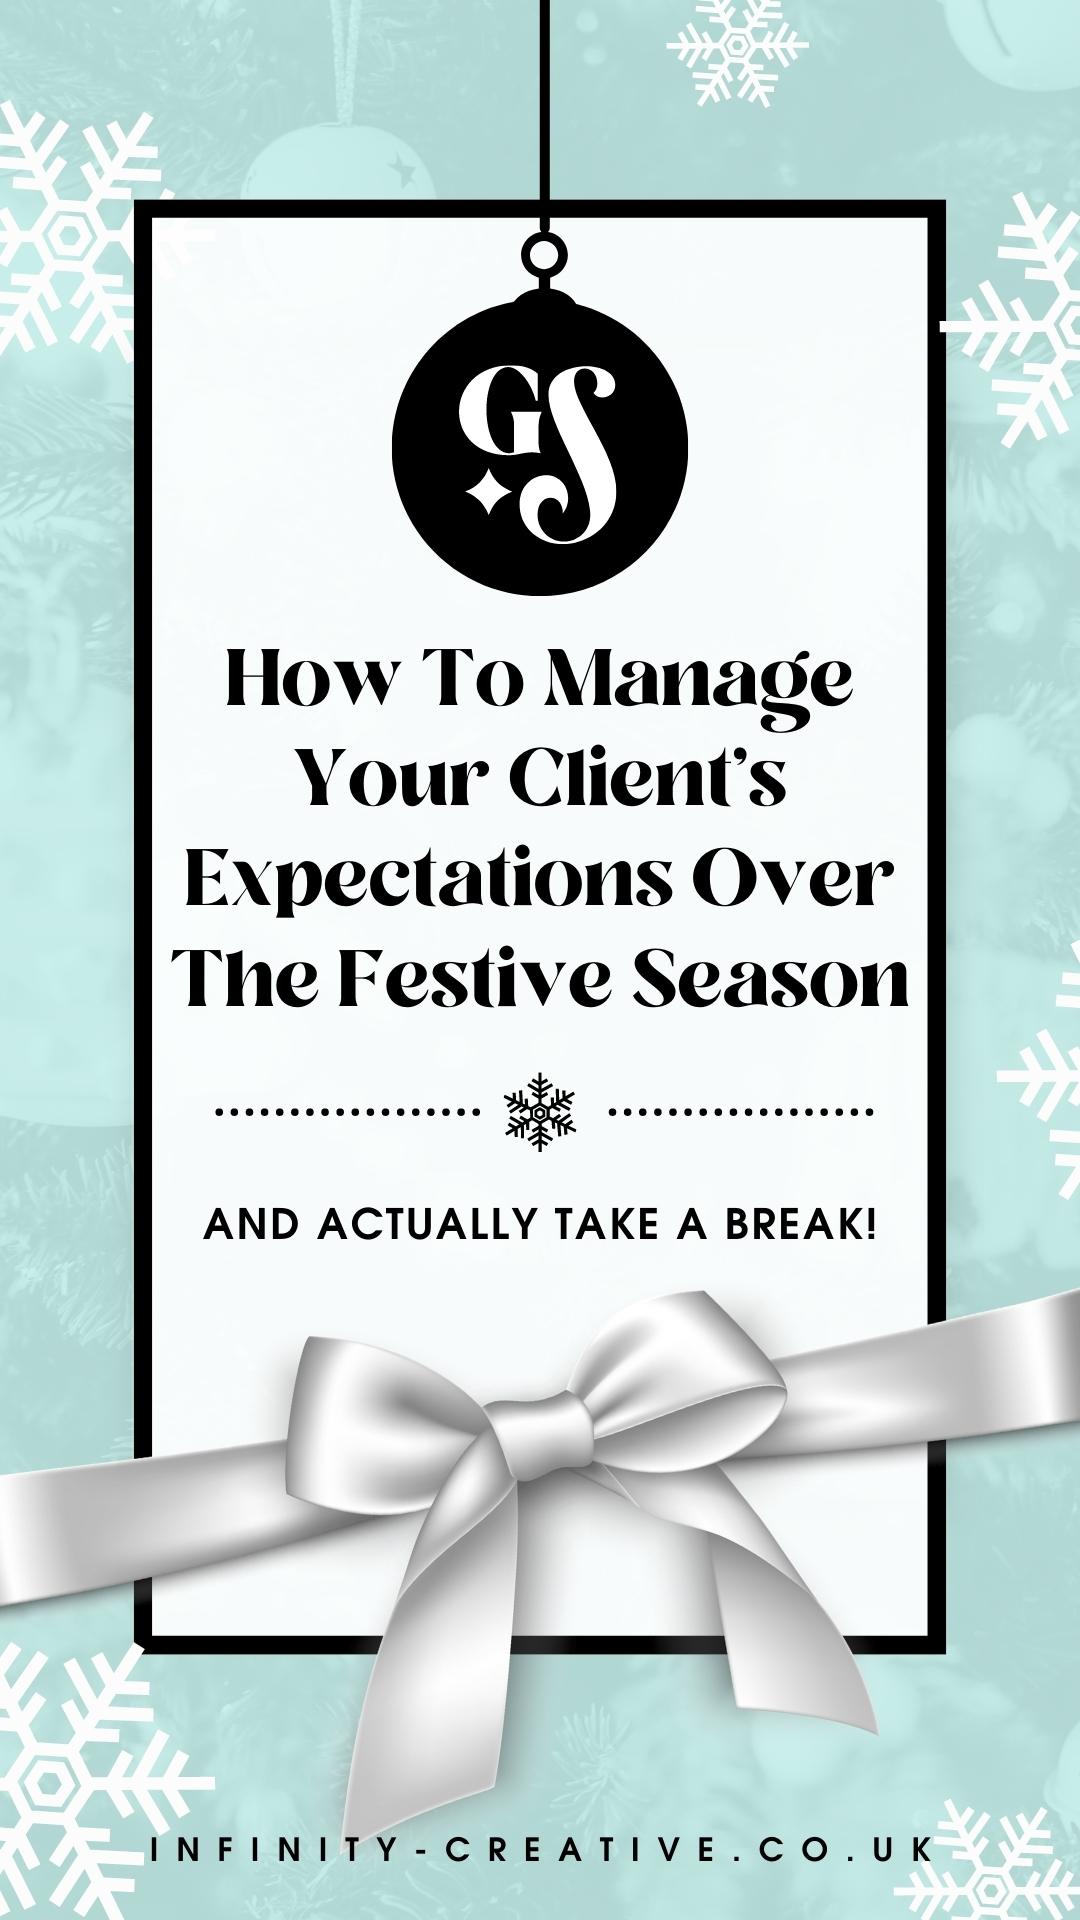 How To Manage Your Client’s Expectations Over The Festive Season… & Actually Take A Break!